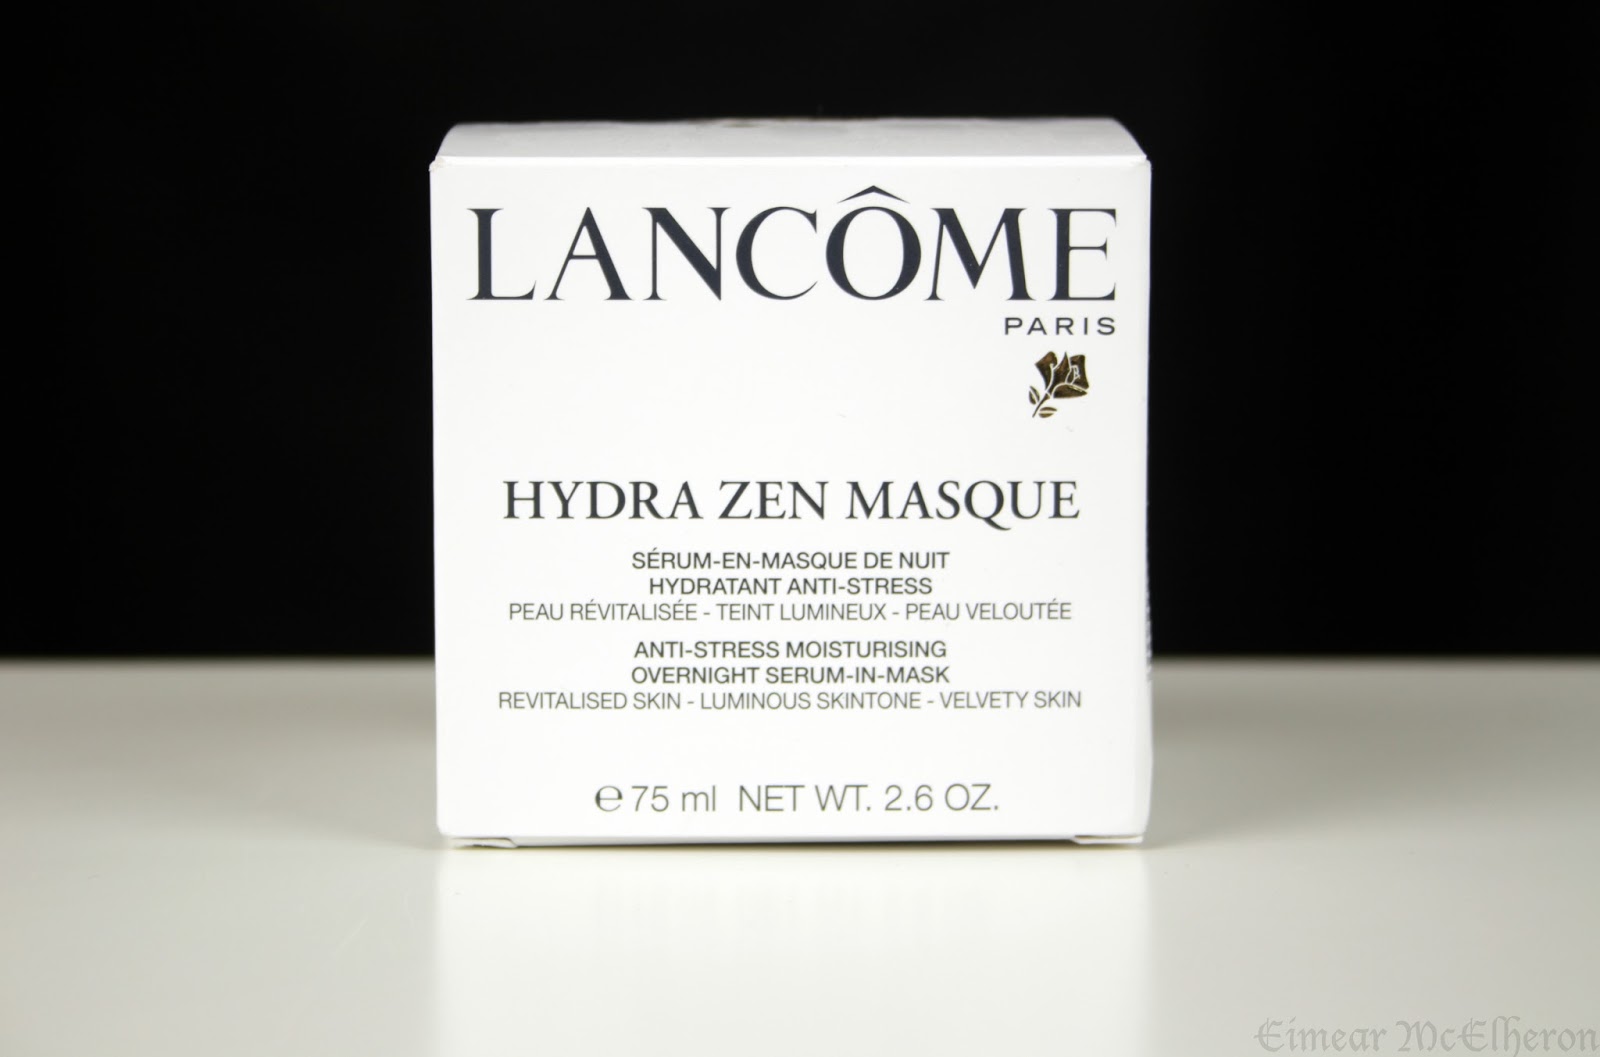 McElheron : Hydra Zen Masque Stress Moisturizing Serum -in-Mask | Review with Before & After!